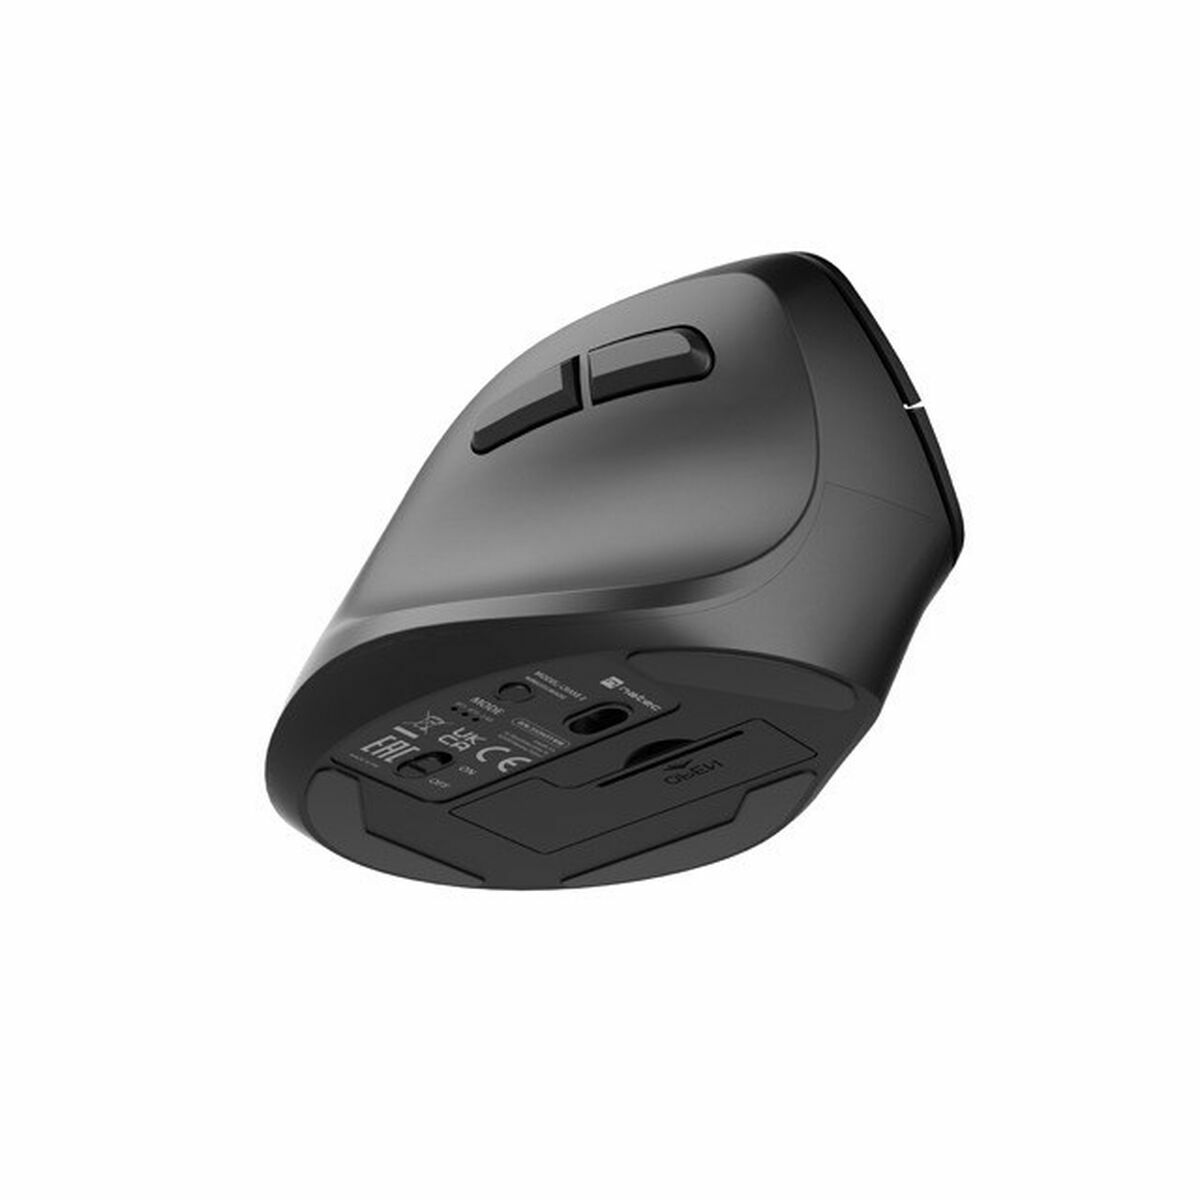 Mouse Natec, Natec, Computing, Accessories, mouse-natec, Brand_Natec, category-reference-2609, category-reference-2642, category-reference-2656, category-reference-t-19685, category-reference-t-19908, category-reference-t-21353, category-reference-t-25626, computers / peripherals, Condition_NEW, office, Price_20 - 50, Teleworking, RiotNook